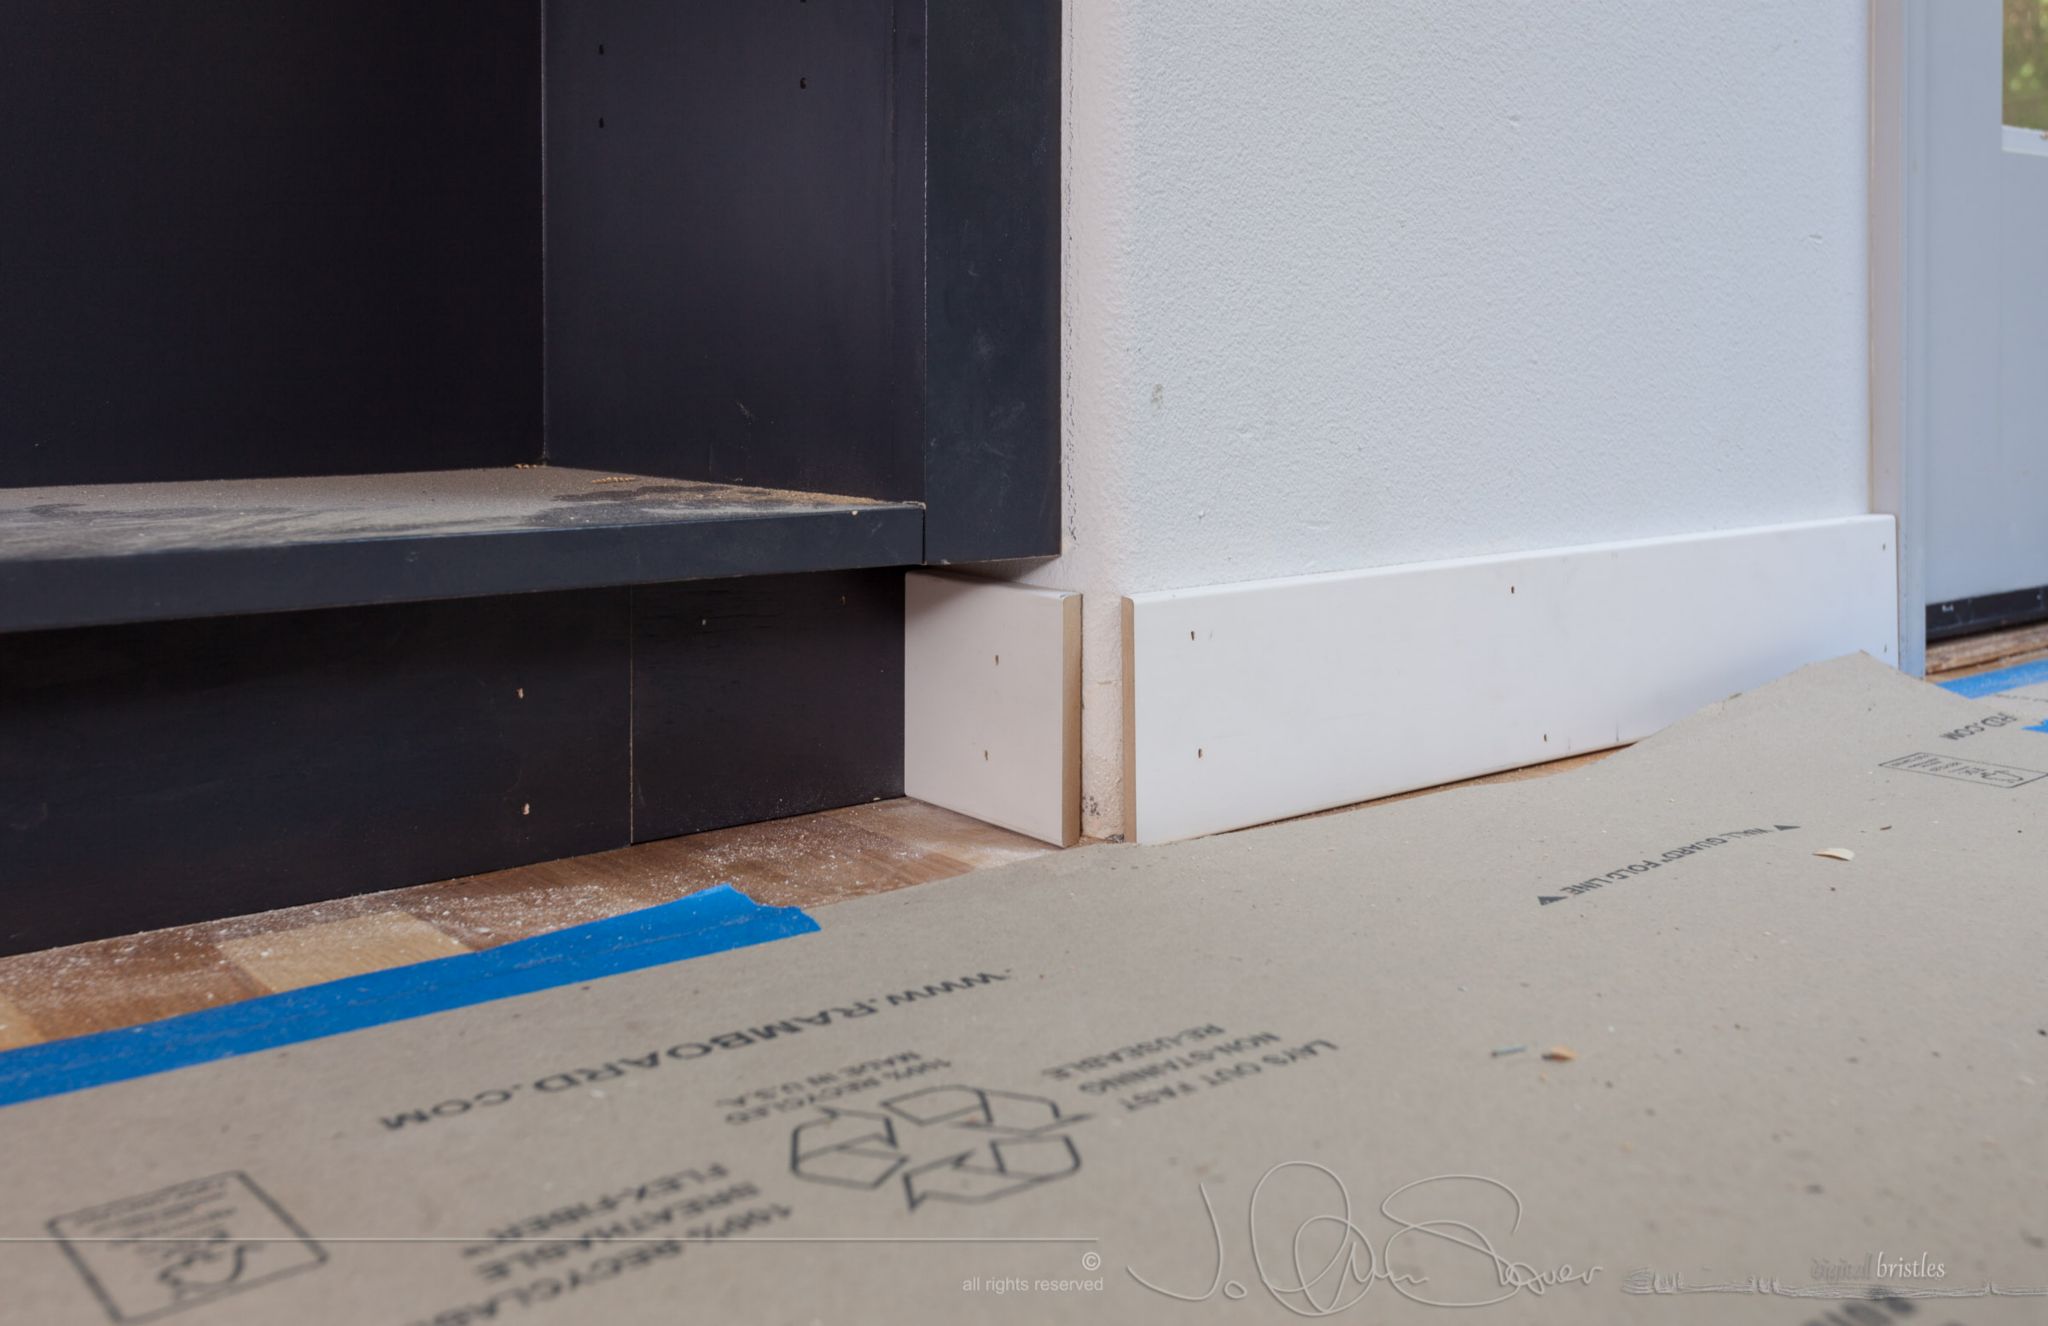 Extra work to make baseboards for round corners. July 15th